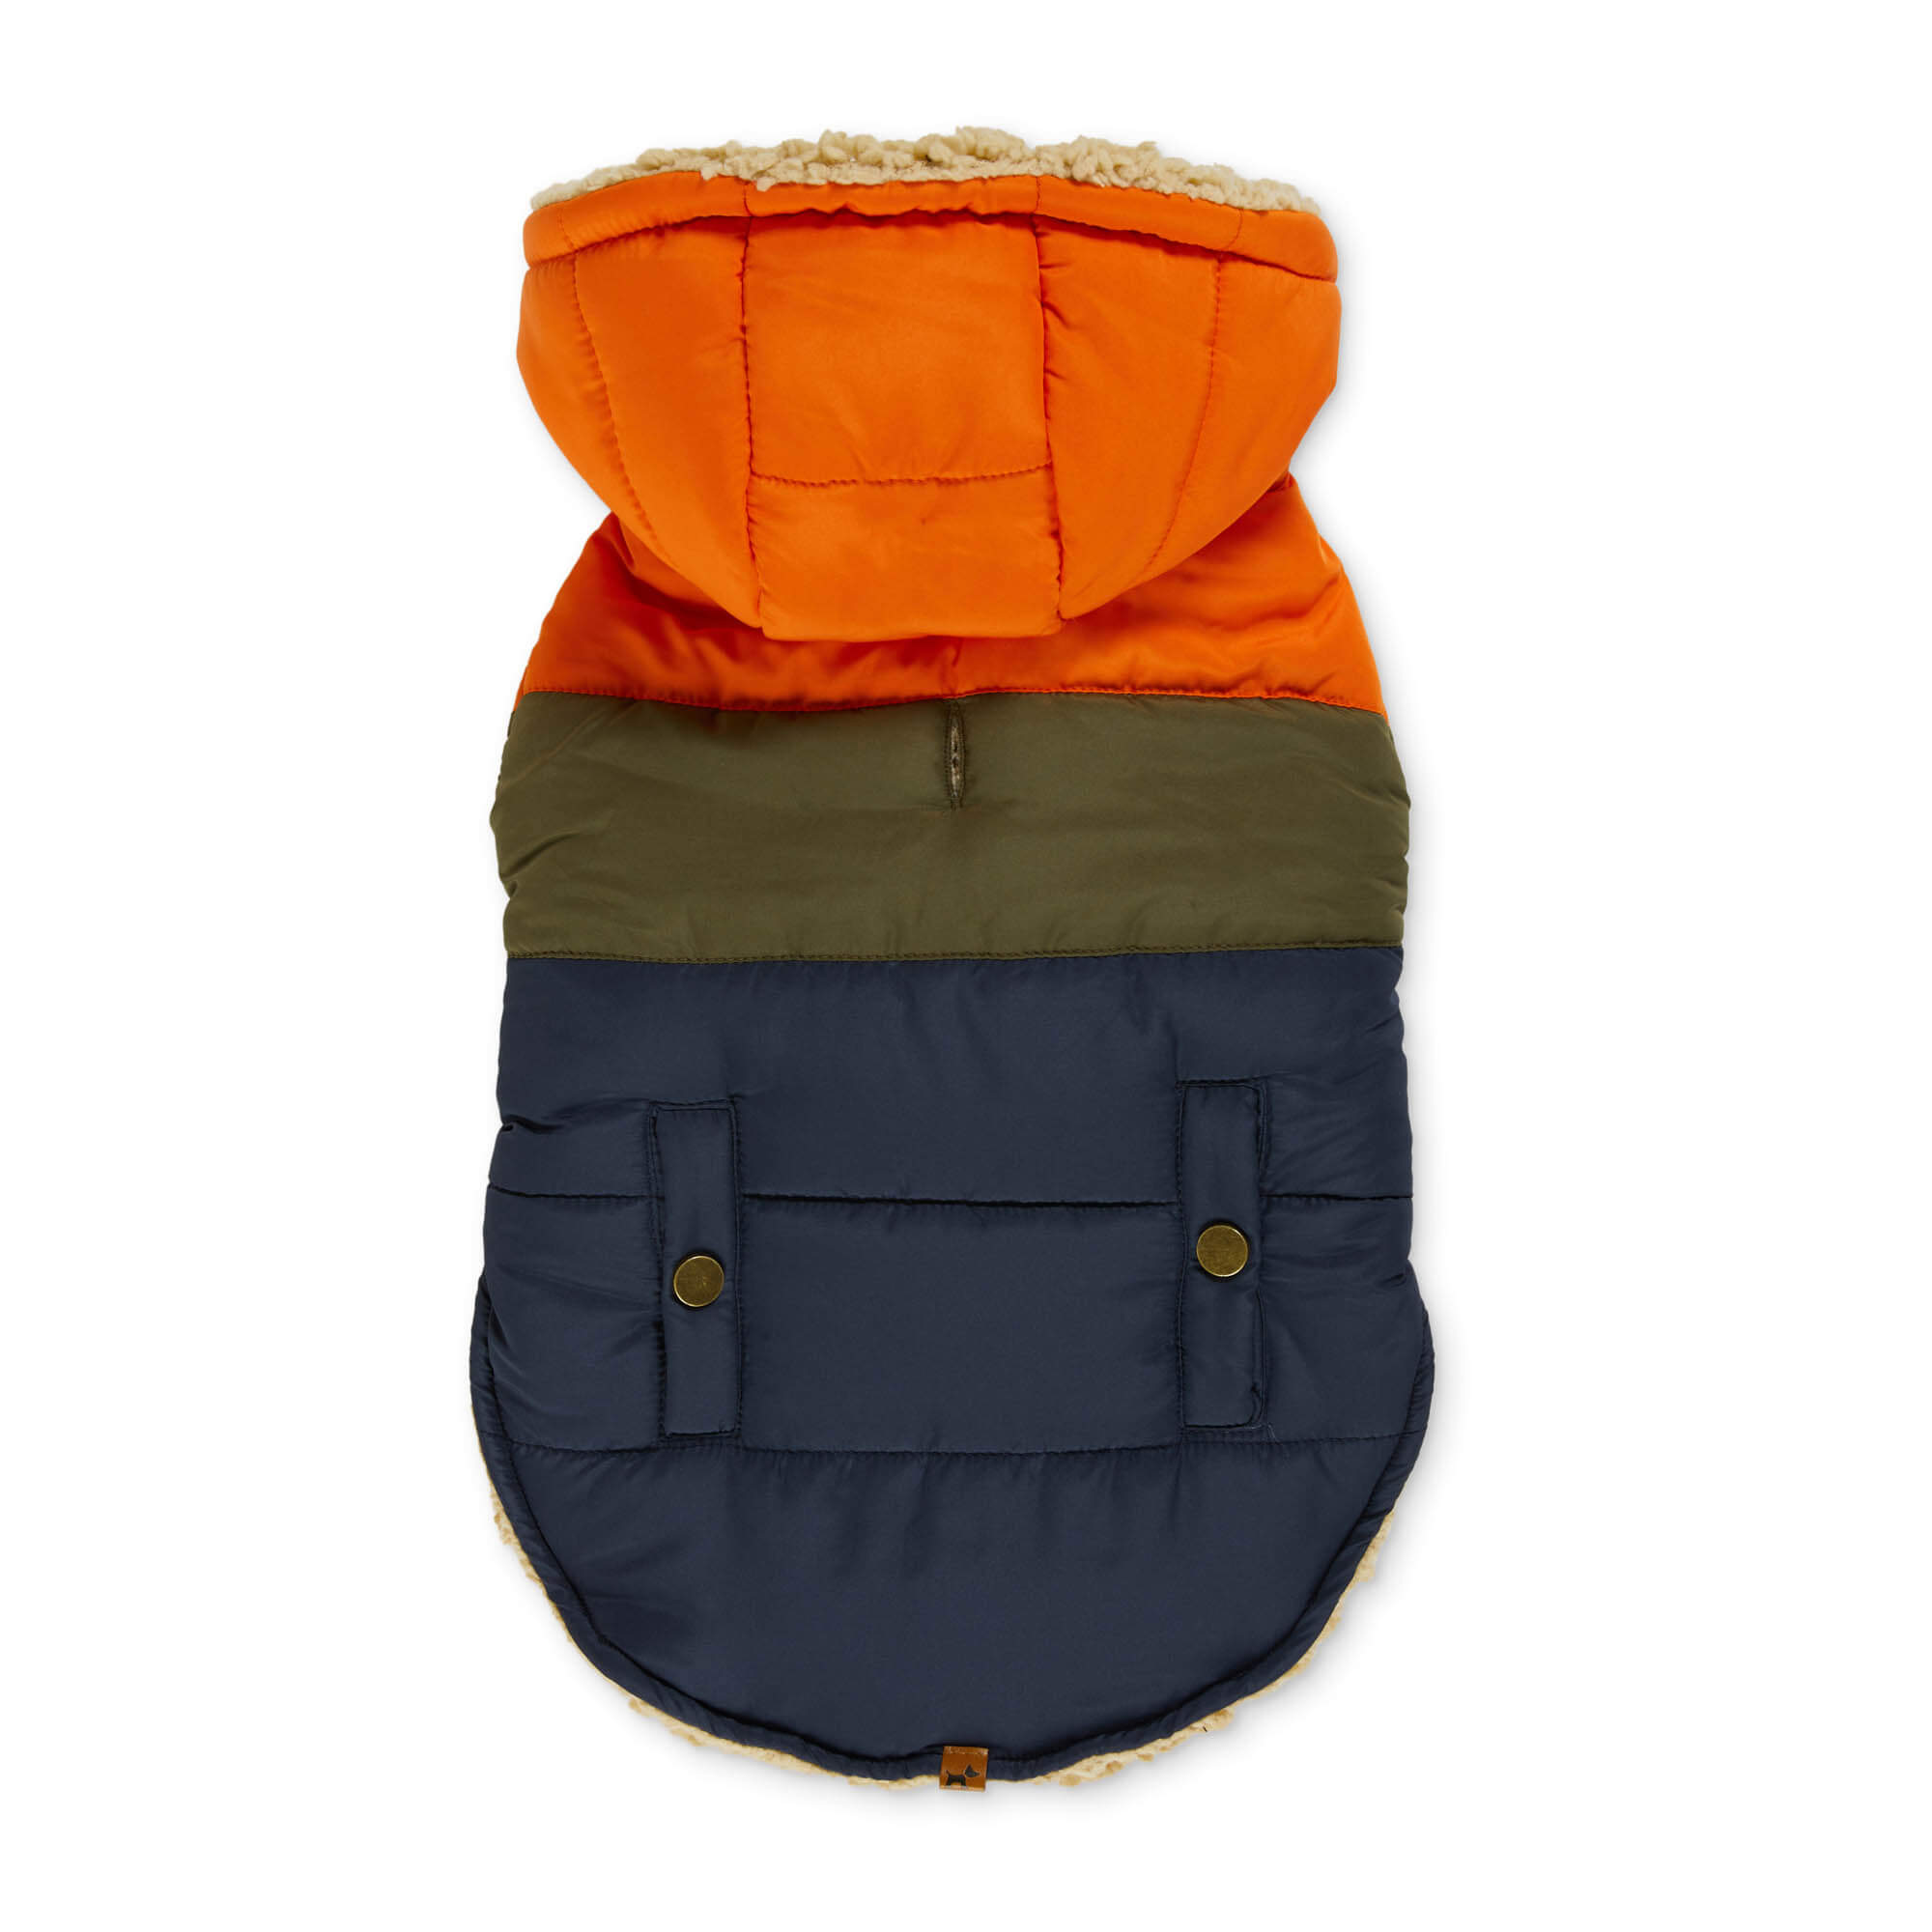 Hotel Doggy Orange and blue parka. Top view